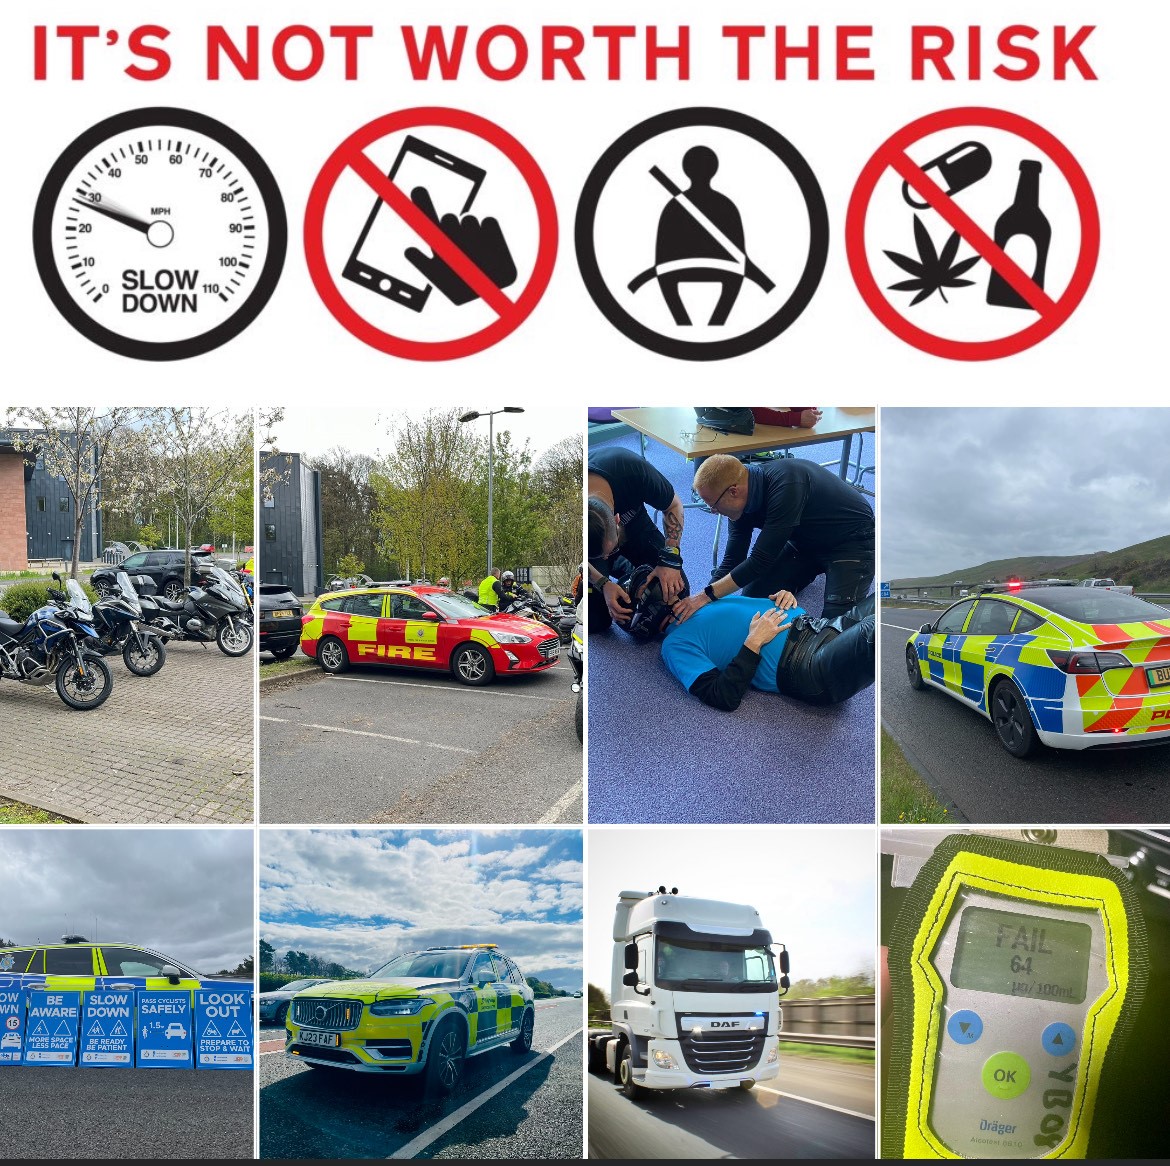 More than 80 drink and drug drivers arrested in April ‘Fatal Four’ operation More: orlo.uk/BZjjv